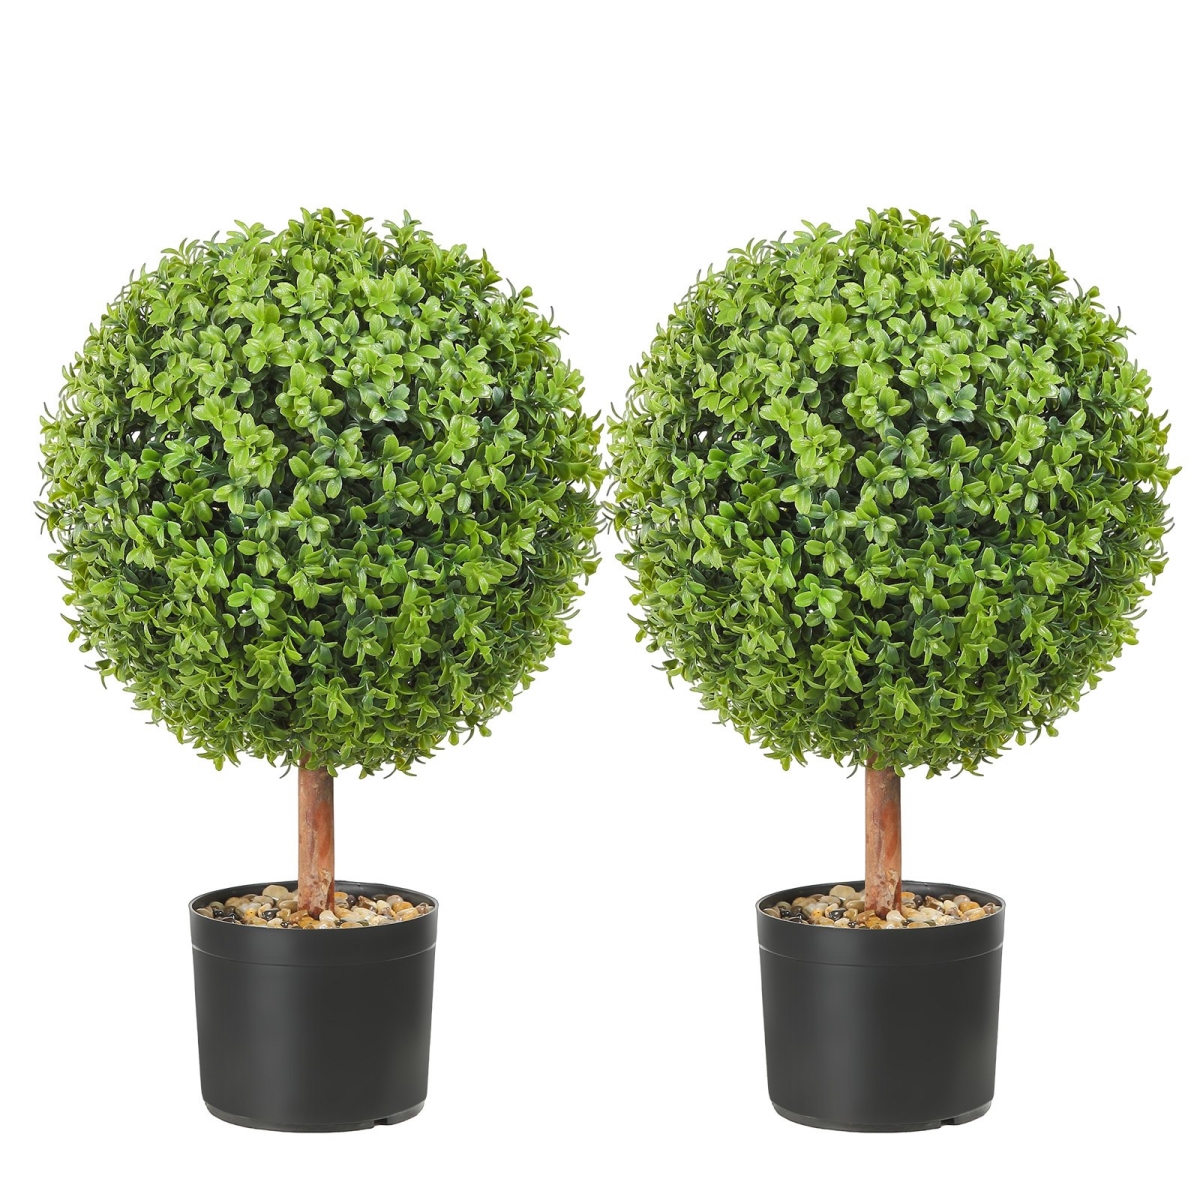 Picture of Vevor HYMRGXJS24YCVVYKMV0 22 in. Artificial Topiaries Boxwood Trees - Green Artificial Boxwood Topiaries with Containers Ball-Shape Plant - 4 Piece